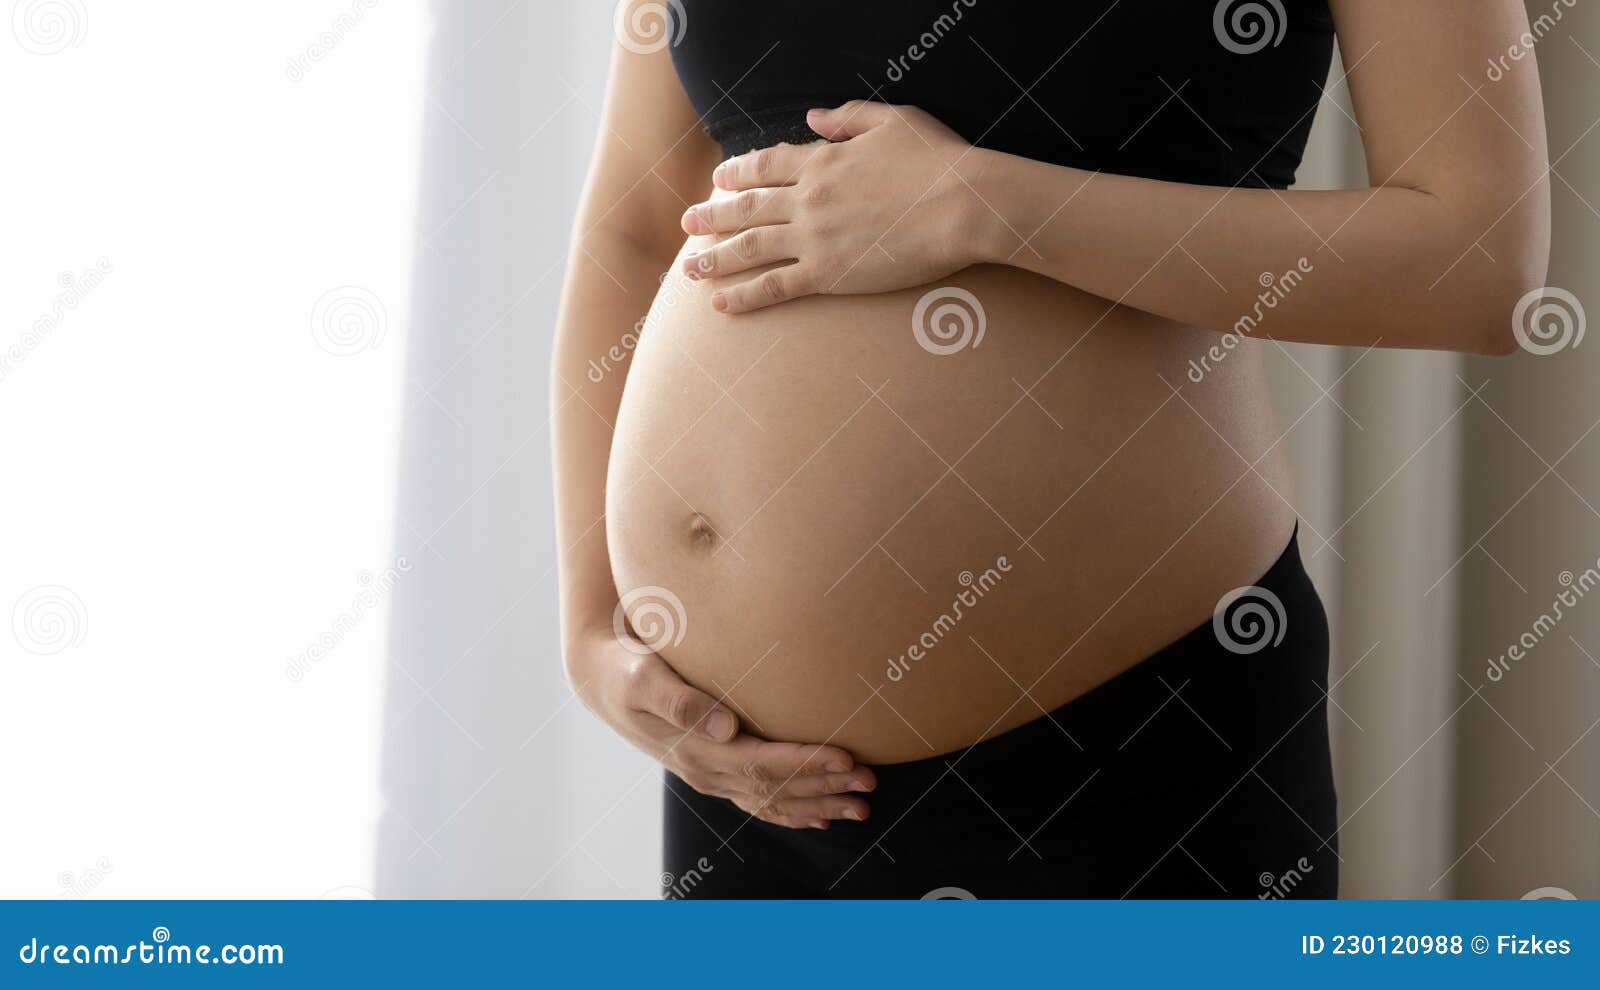 Huge Pregnant Belly Nude - Future Mom Holding Both Hands on Naked Heavy Pregnant Belly Stock Photo -  Image of happy, birth: 230120988